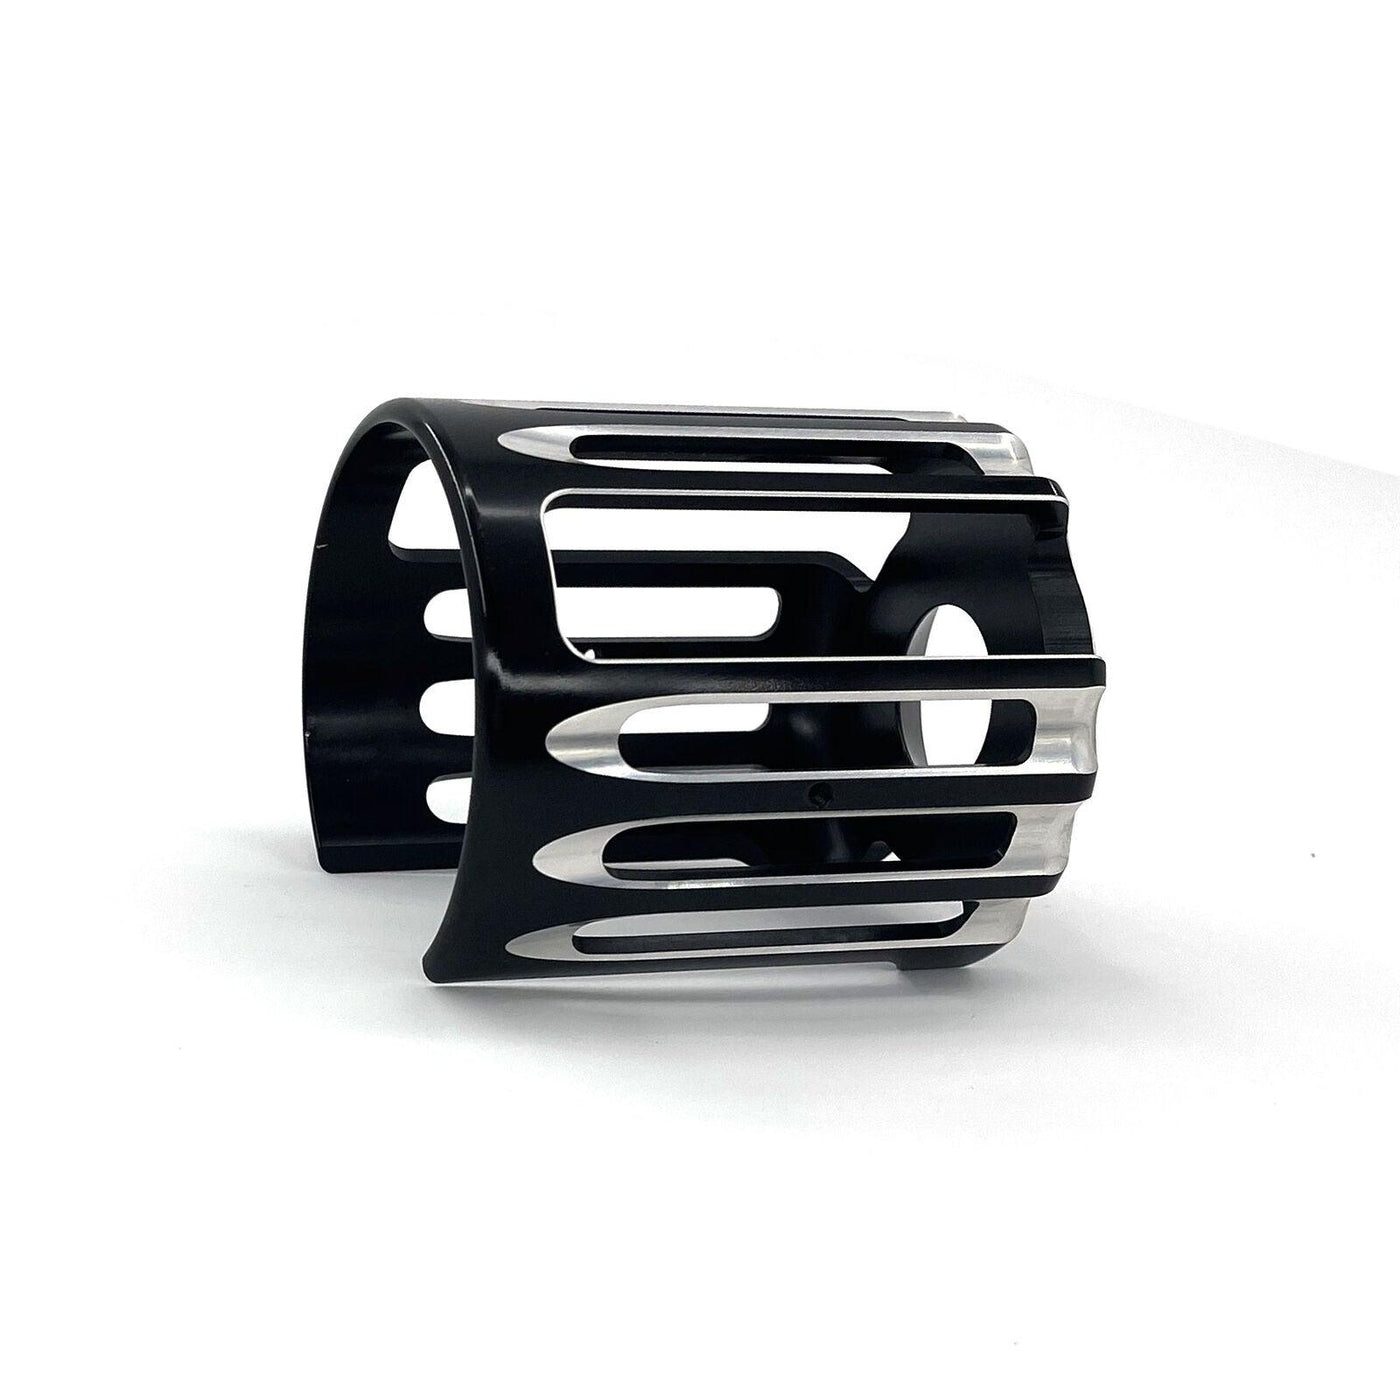 Black CNC Oil Filter Cover Cap Trim Fit For Harley Touring Street Electra Glide - Moto Life Products